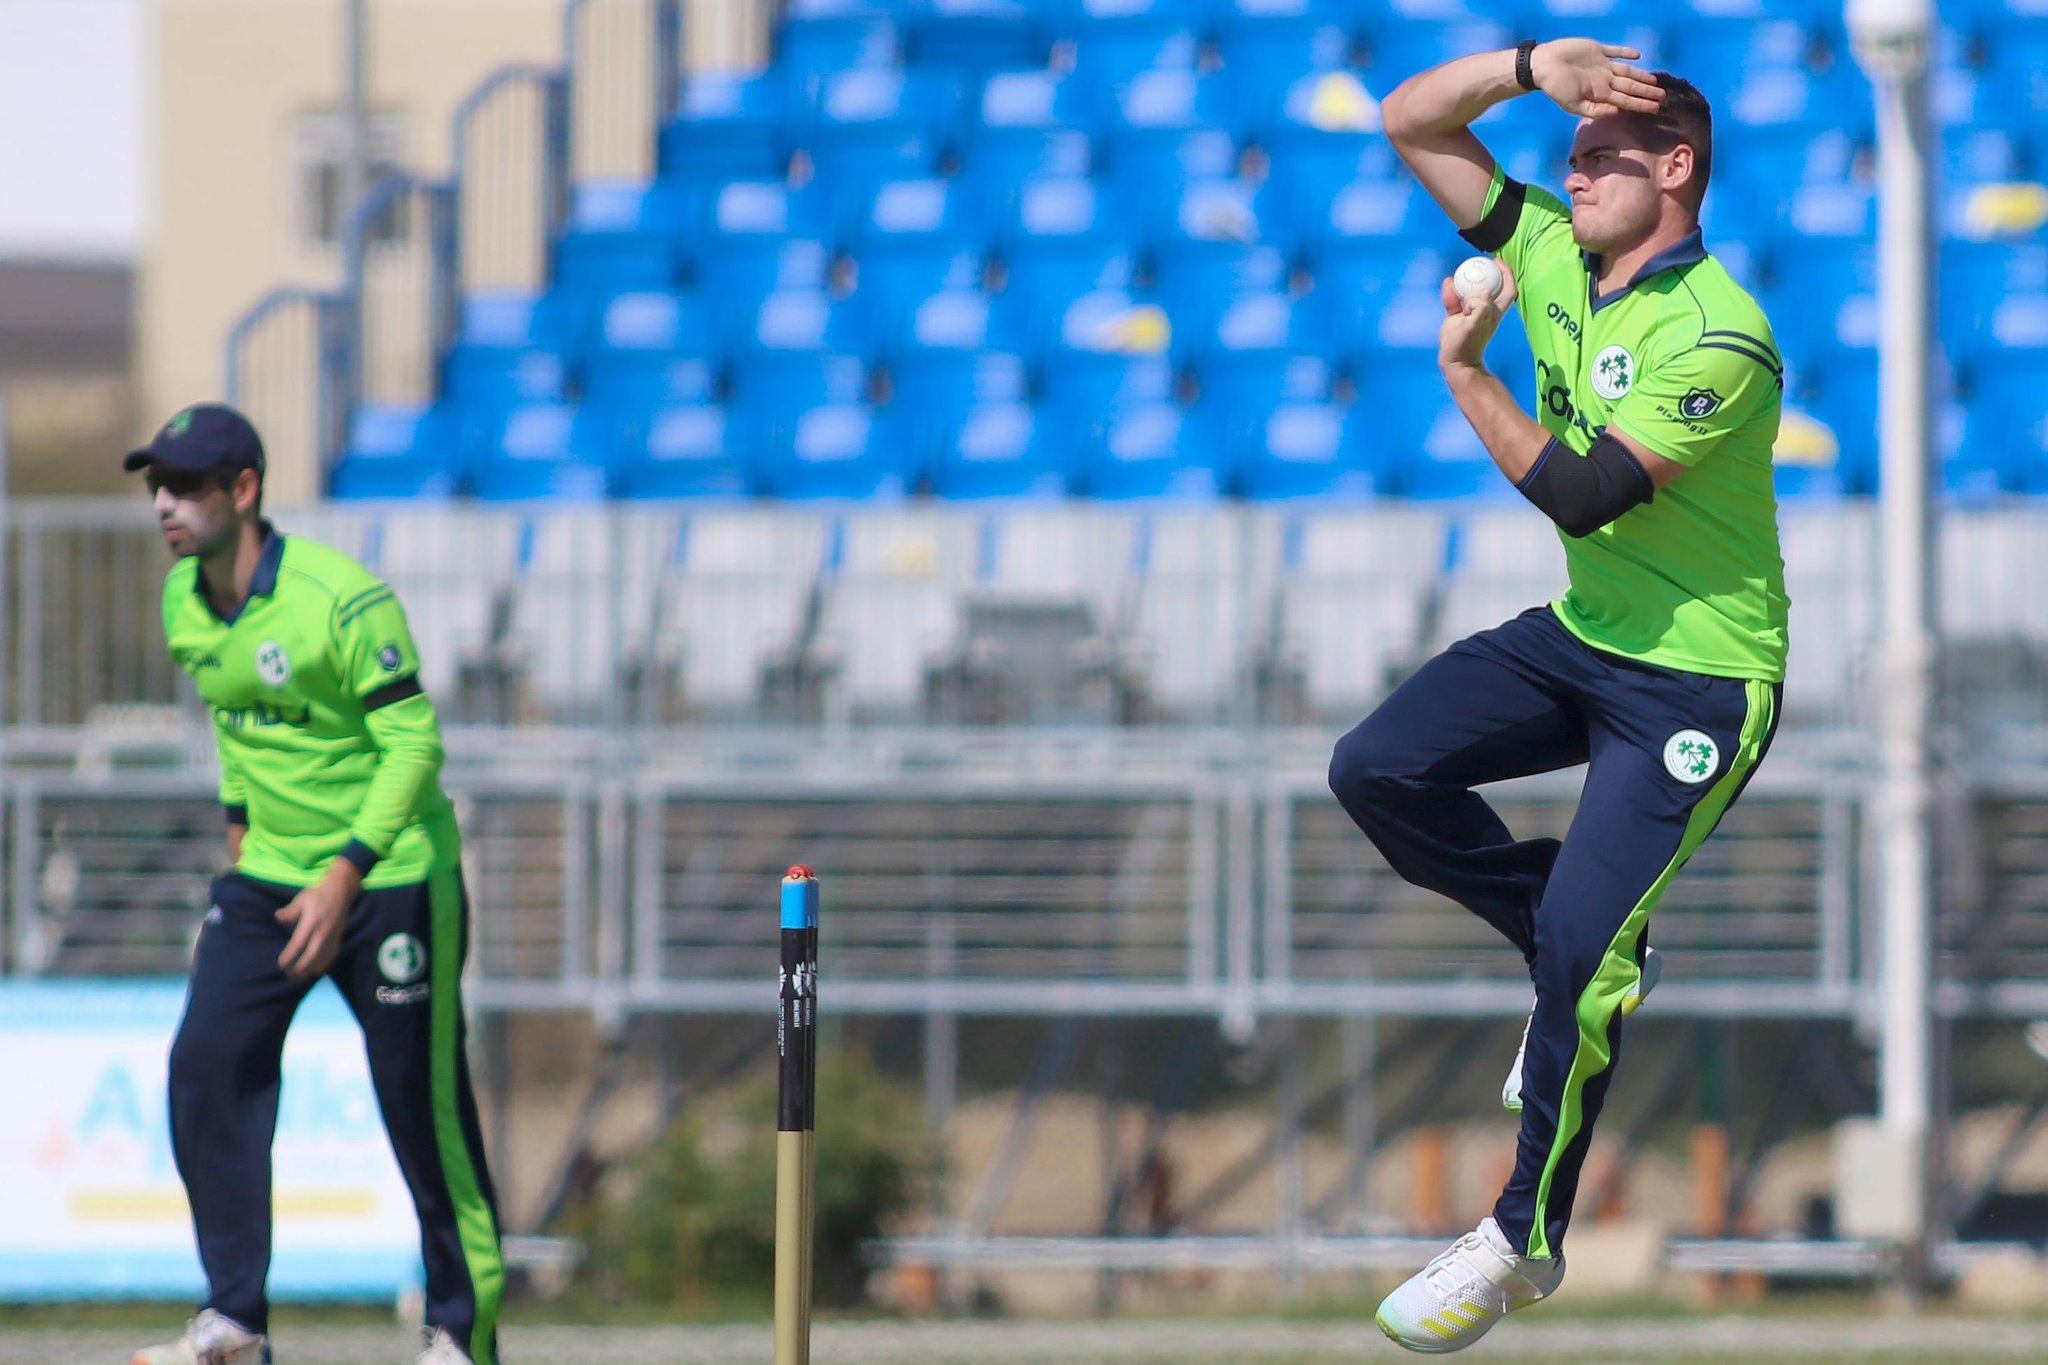 Ireland stand one win away from T20 World Cup spot